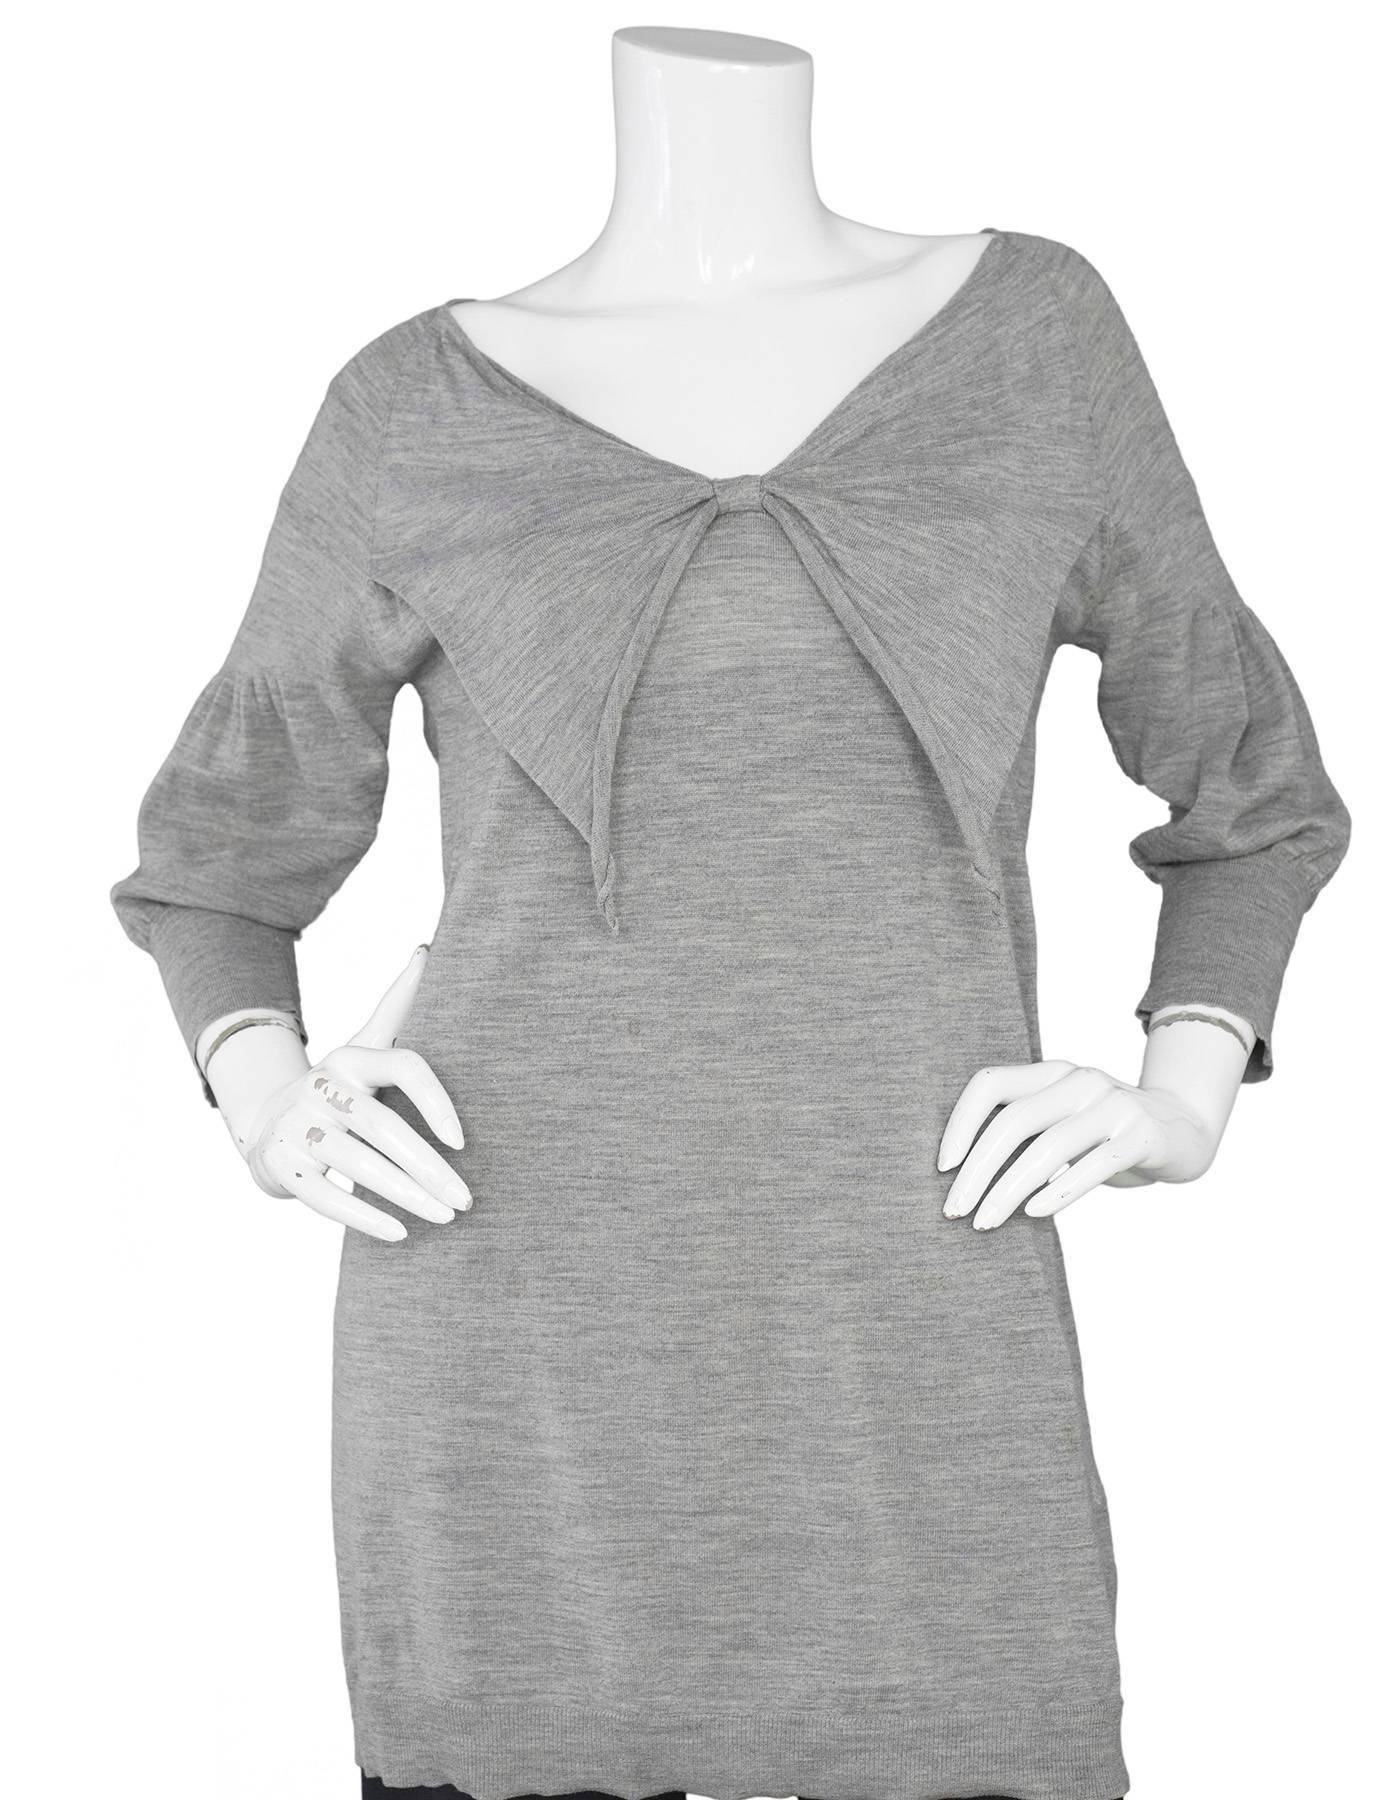 Miu Miu Grey Long Knit Tunic 
Features bow tied on front neckline

Made In: Italy
Color: Grey
Composition: Not given- believed to be a wool blend
Lining: None
Closure/Opening: Pull over
Exterior Pocket: None
Interior Condition: None
Overall